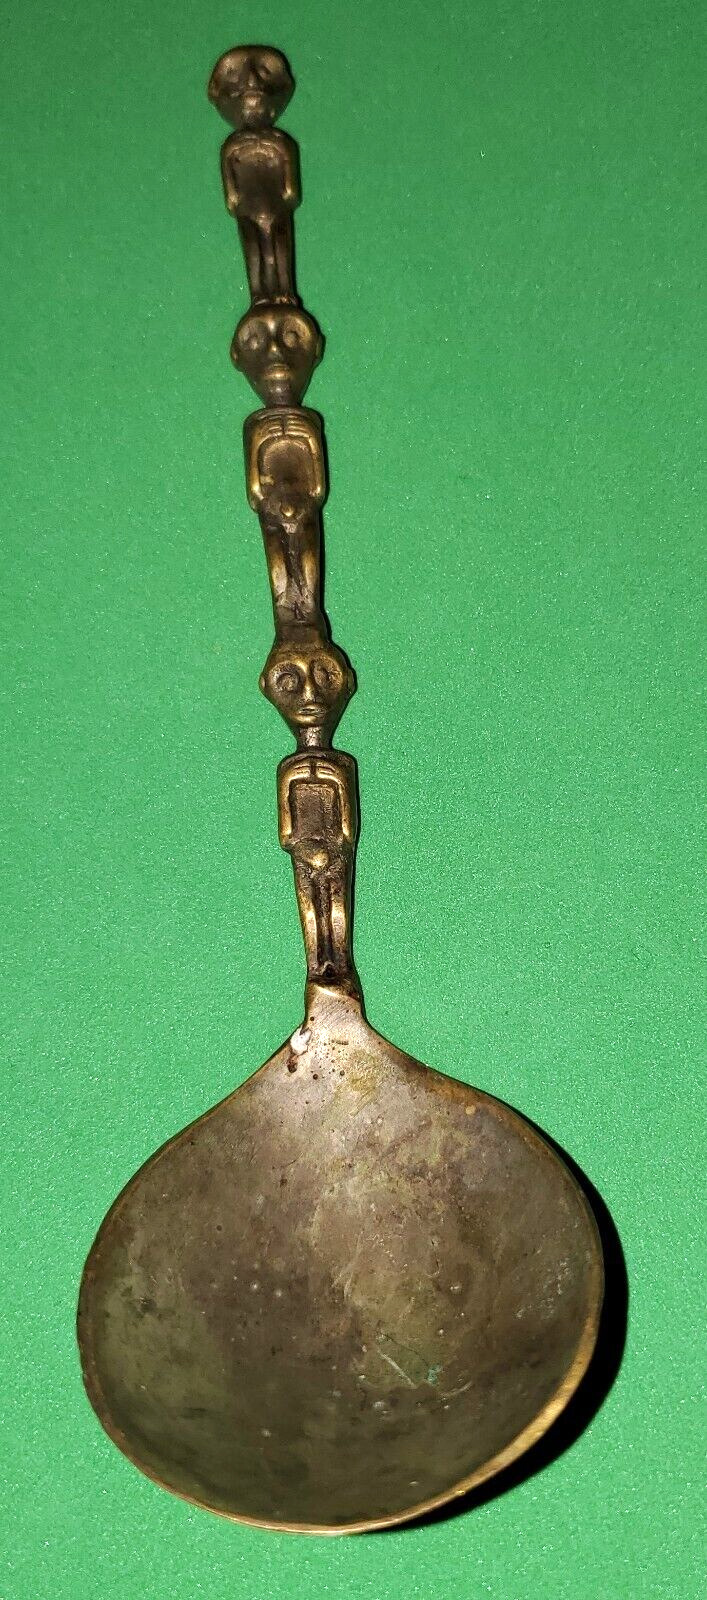 Antique Wide Bowl Spoon With Three Figures, Possibly Handmade